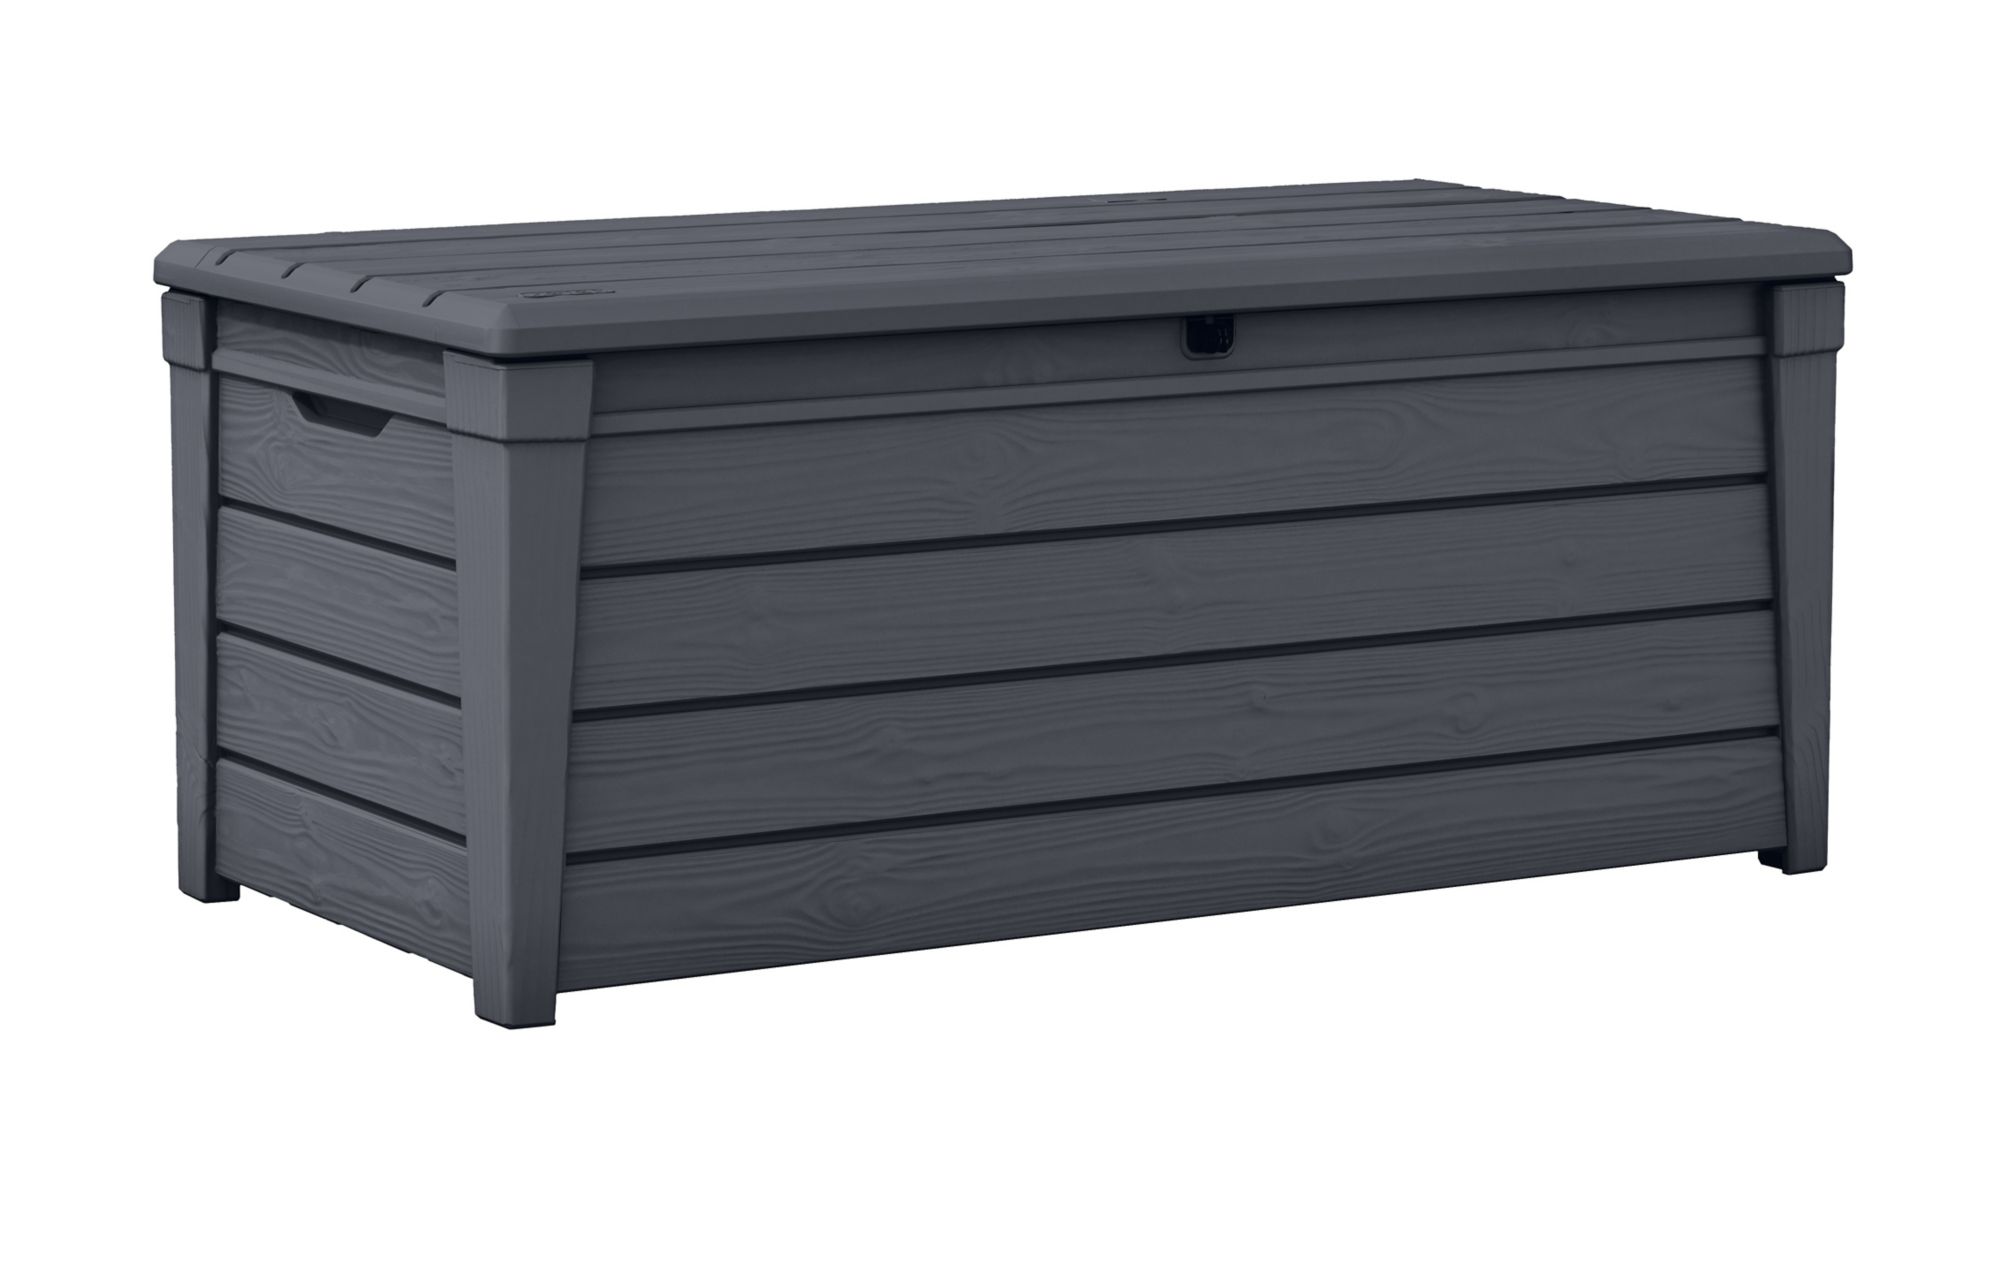 Keter Brightwood 120-Gal. Deck Box - Anthracite